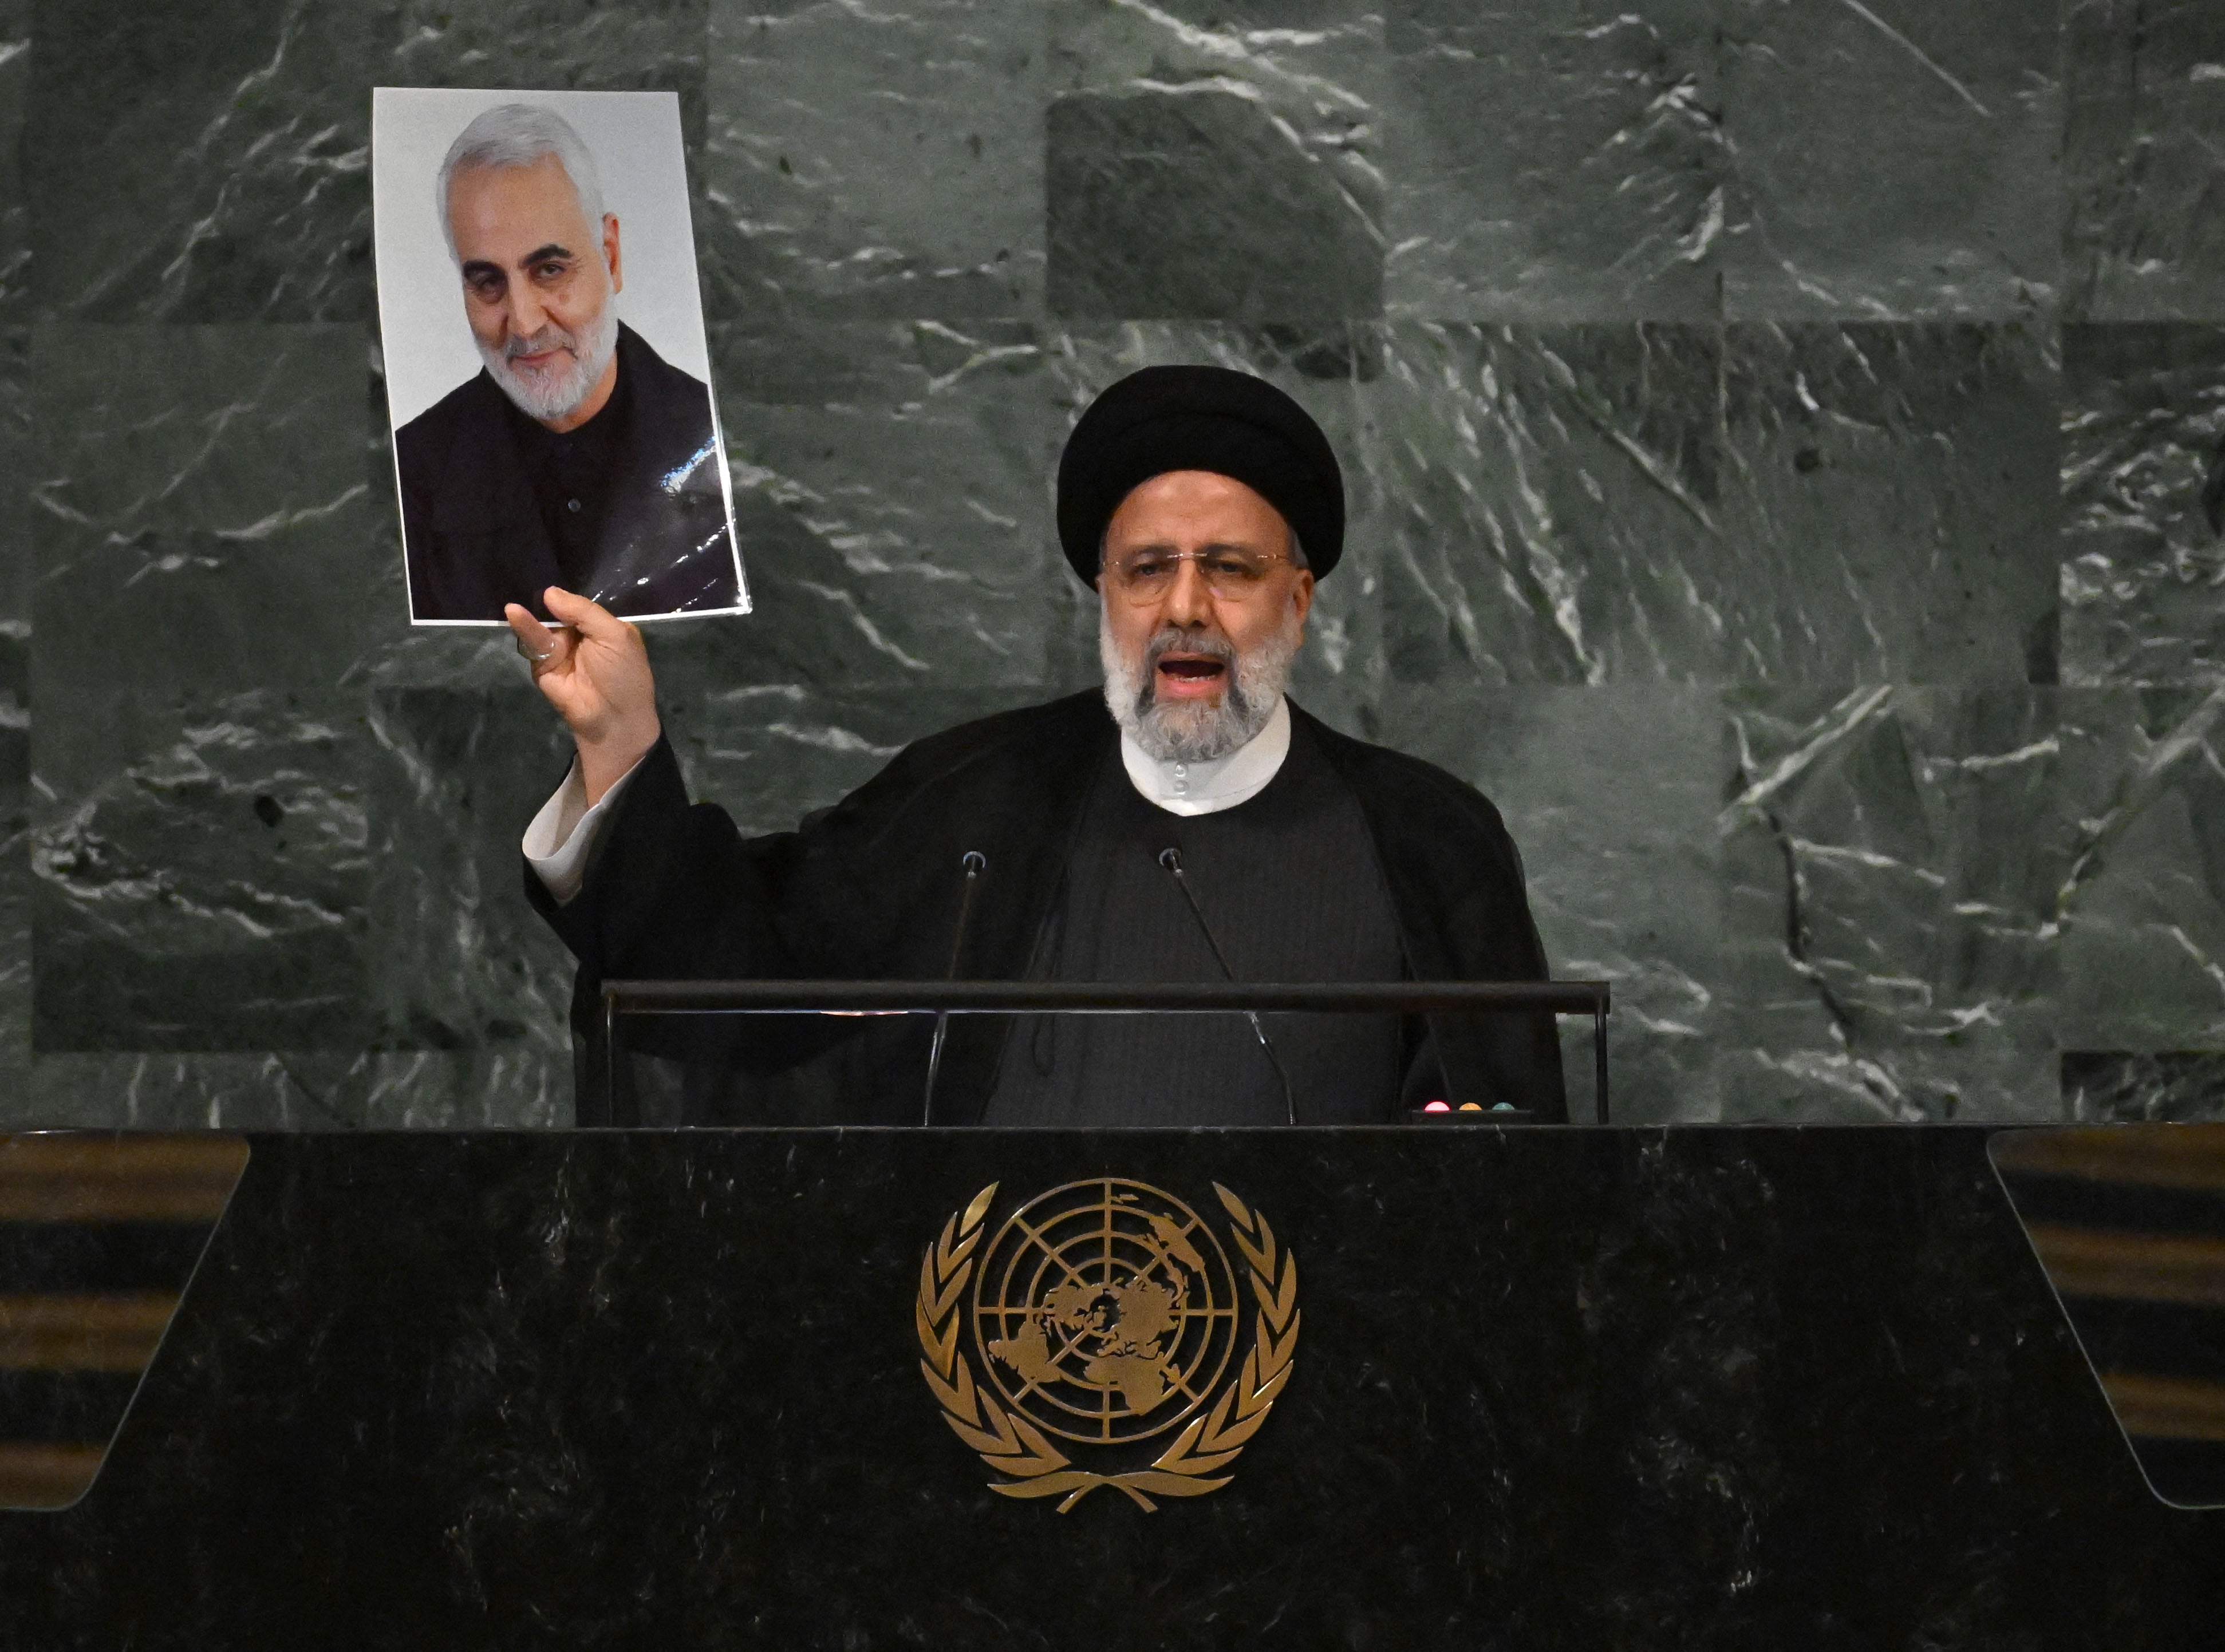 Iranian President Ebrahim Raisi addresses the 77th session of the United Nations General Assembly while holding a photo of Iranian General Qasem Soleimani killed by a US drone strike in Baghdad in January 2020